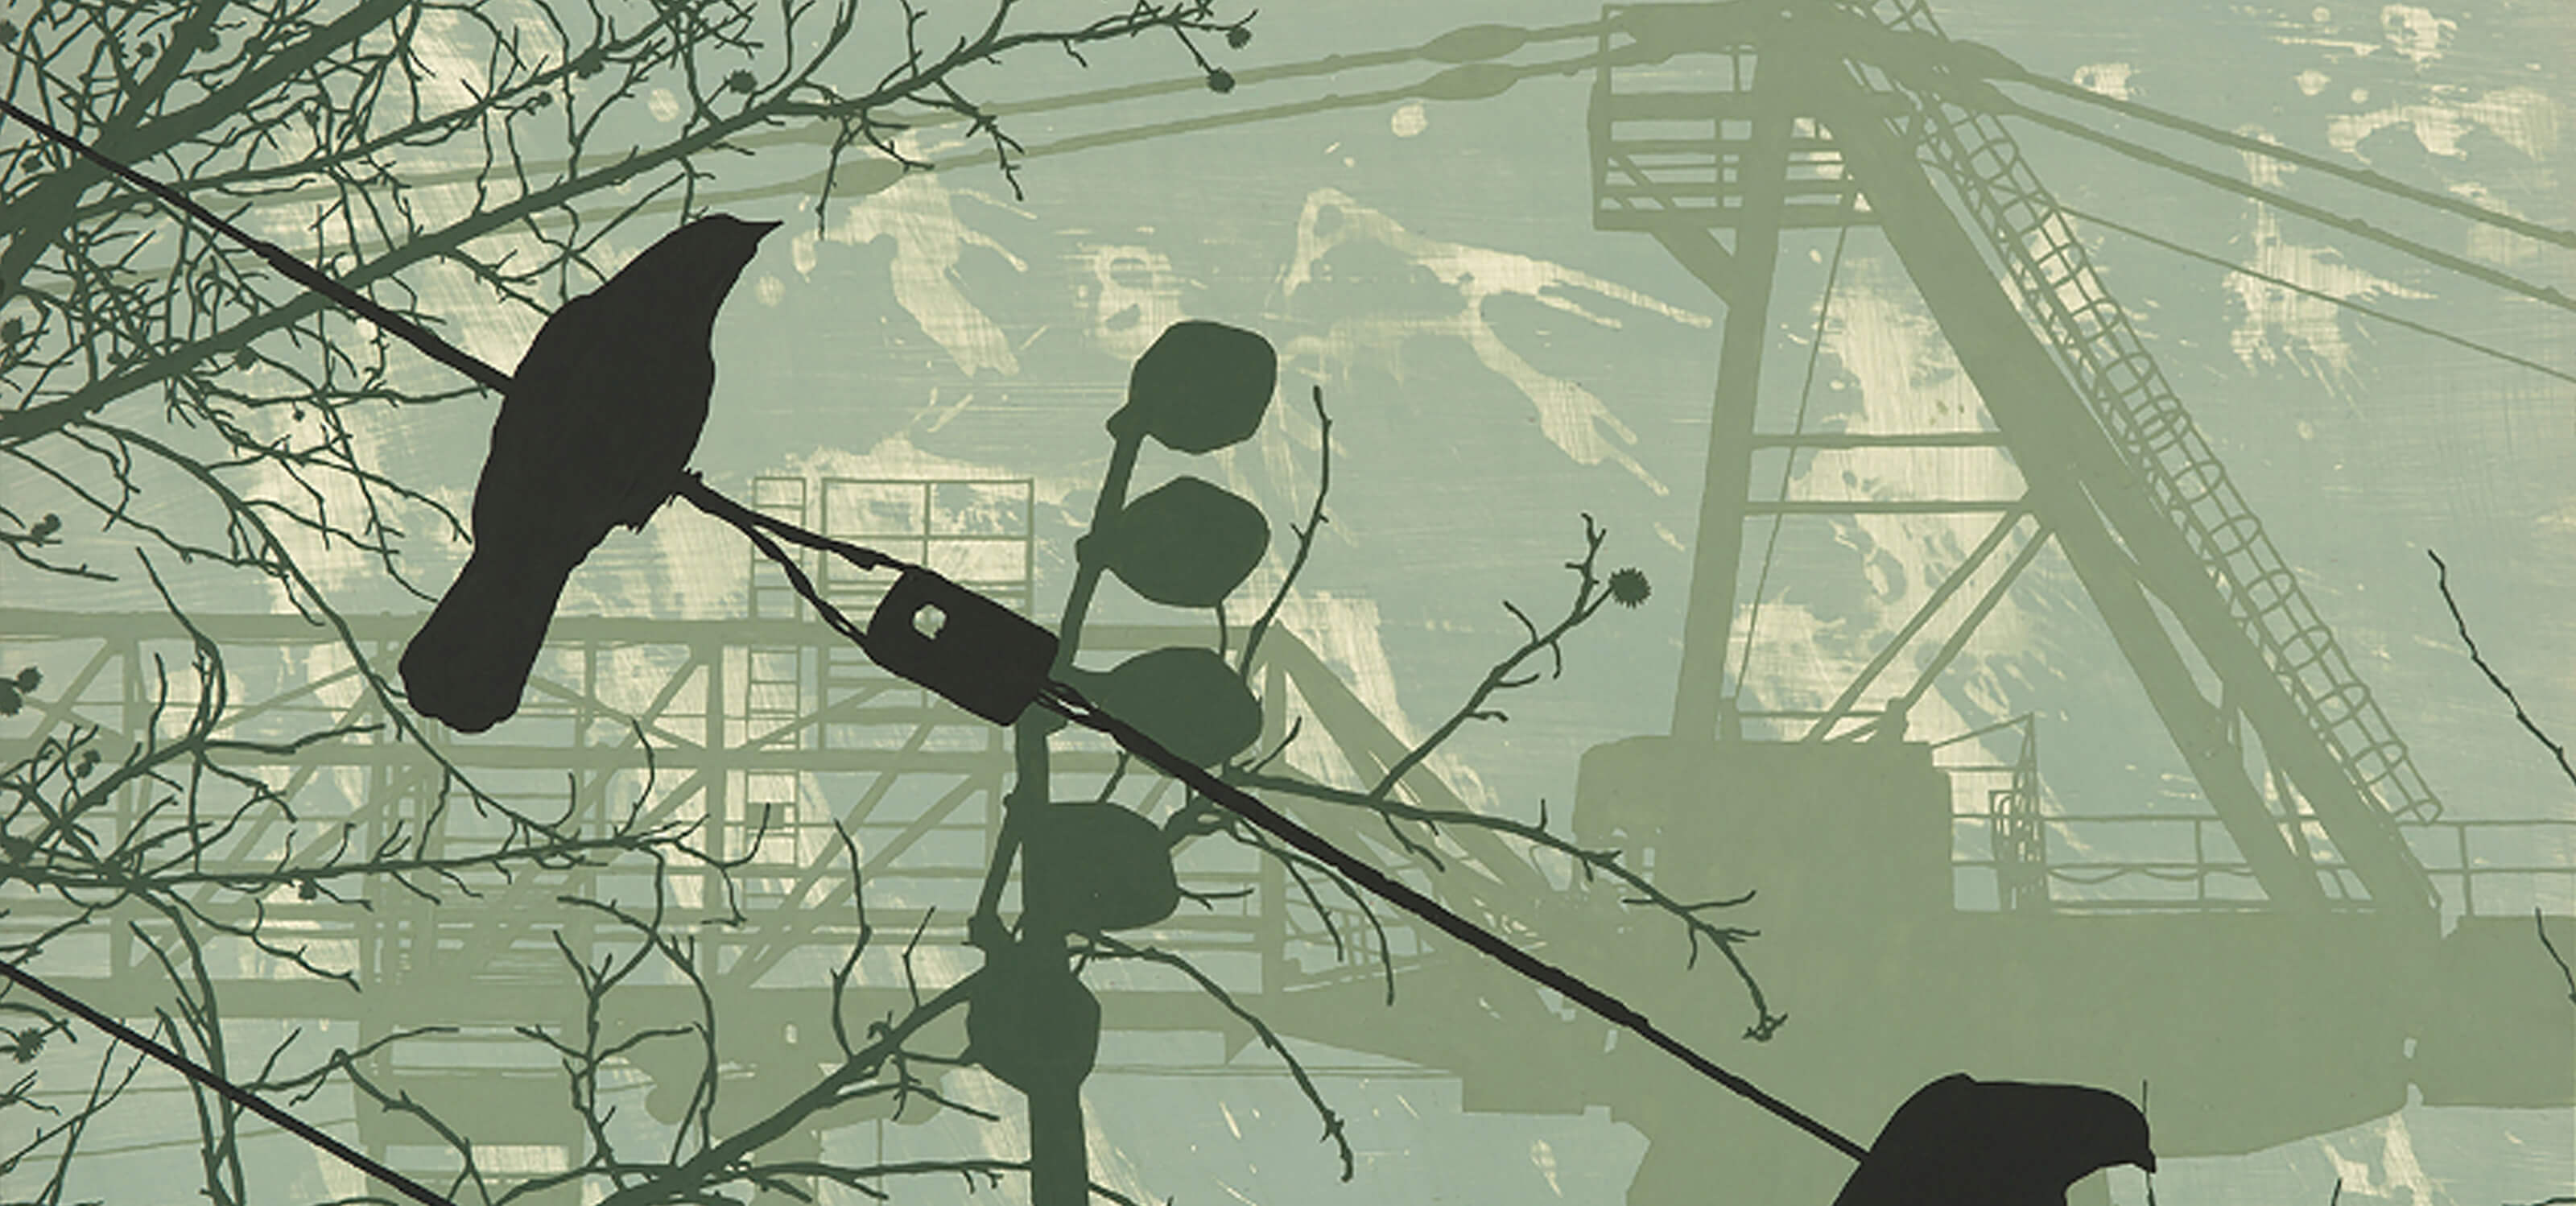 DigiPen MFA student Alex Bennett's painting of crows on a telephone wire with a construction crane in the background